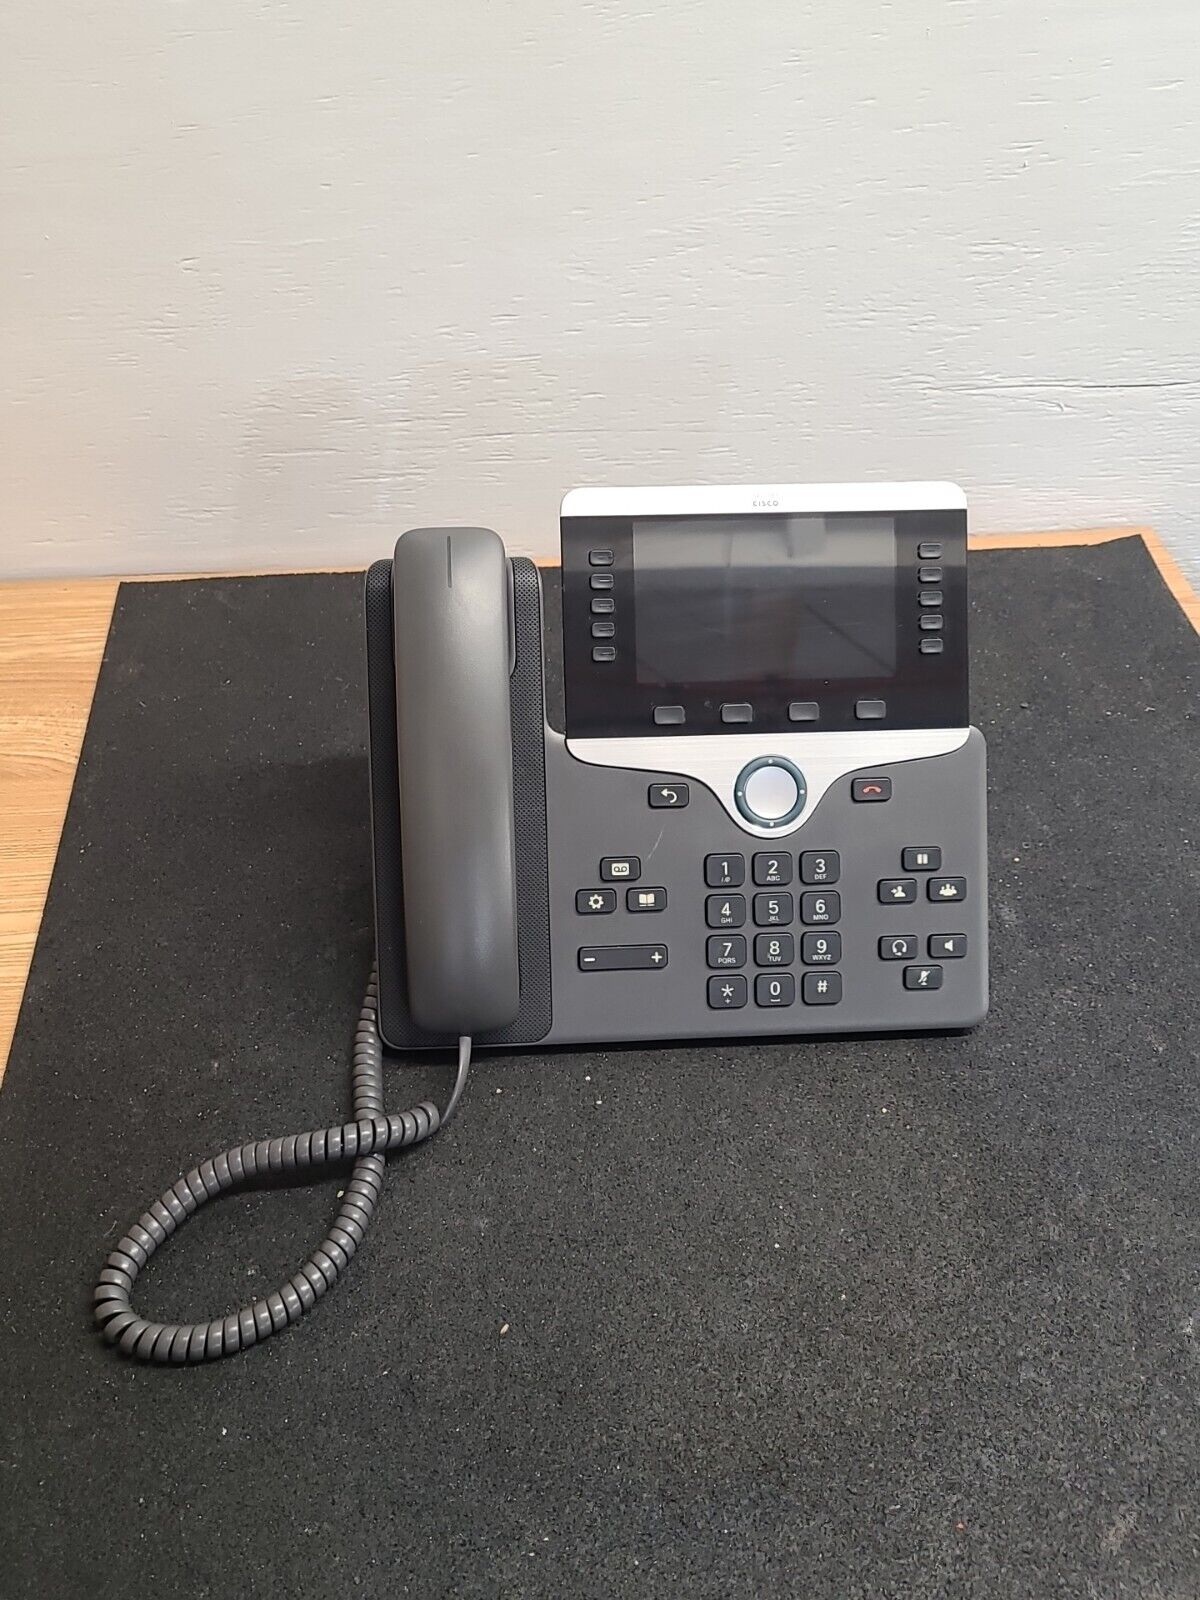 Cisco 8851 CP-8851 CP-8851-K9 Display  IP Office Phone w/ Cord, Handset & Stand